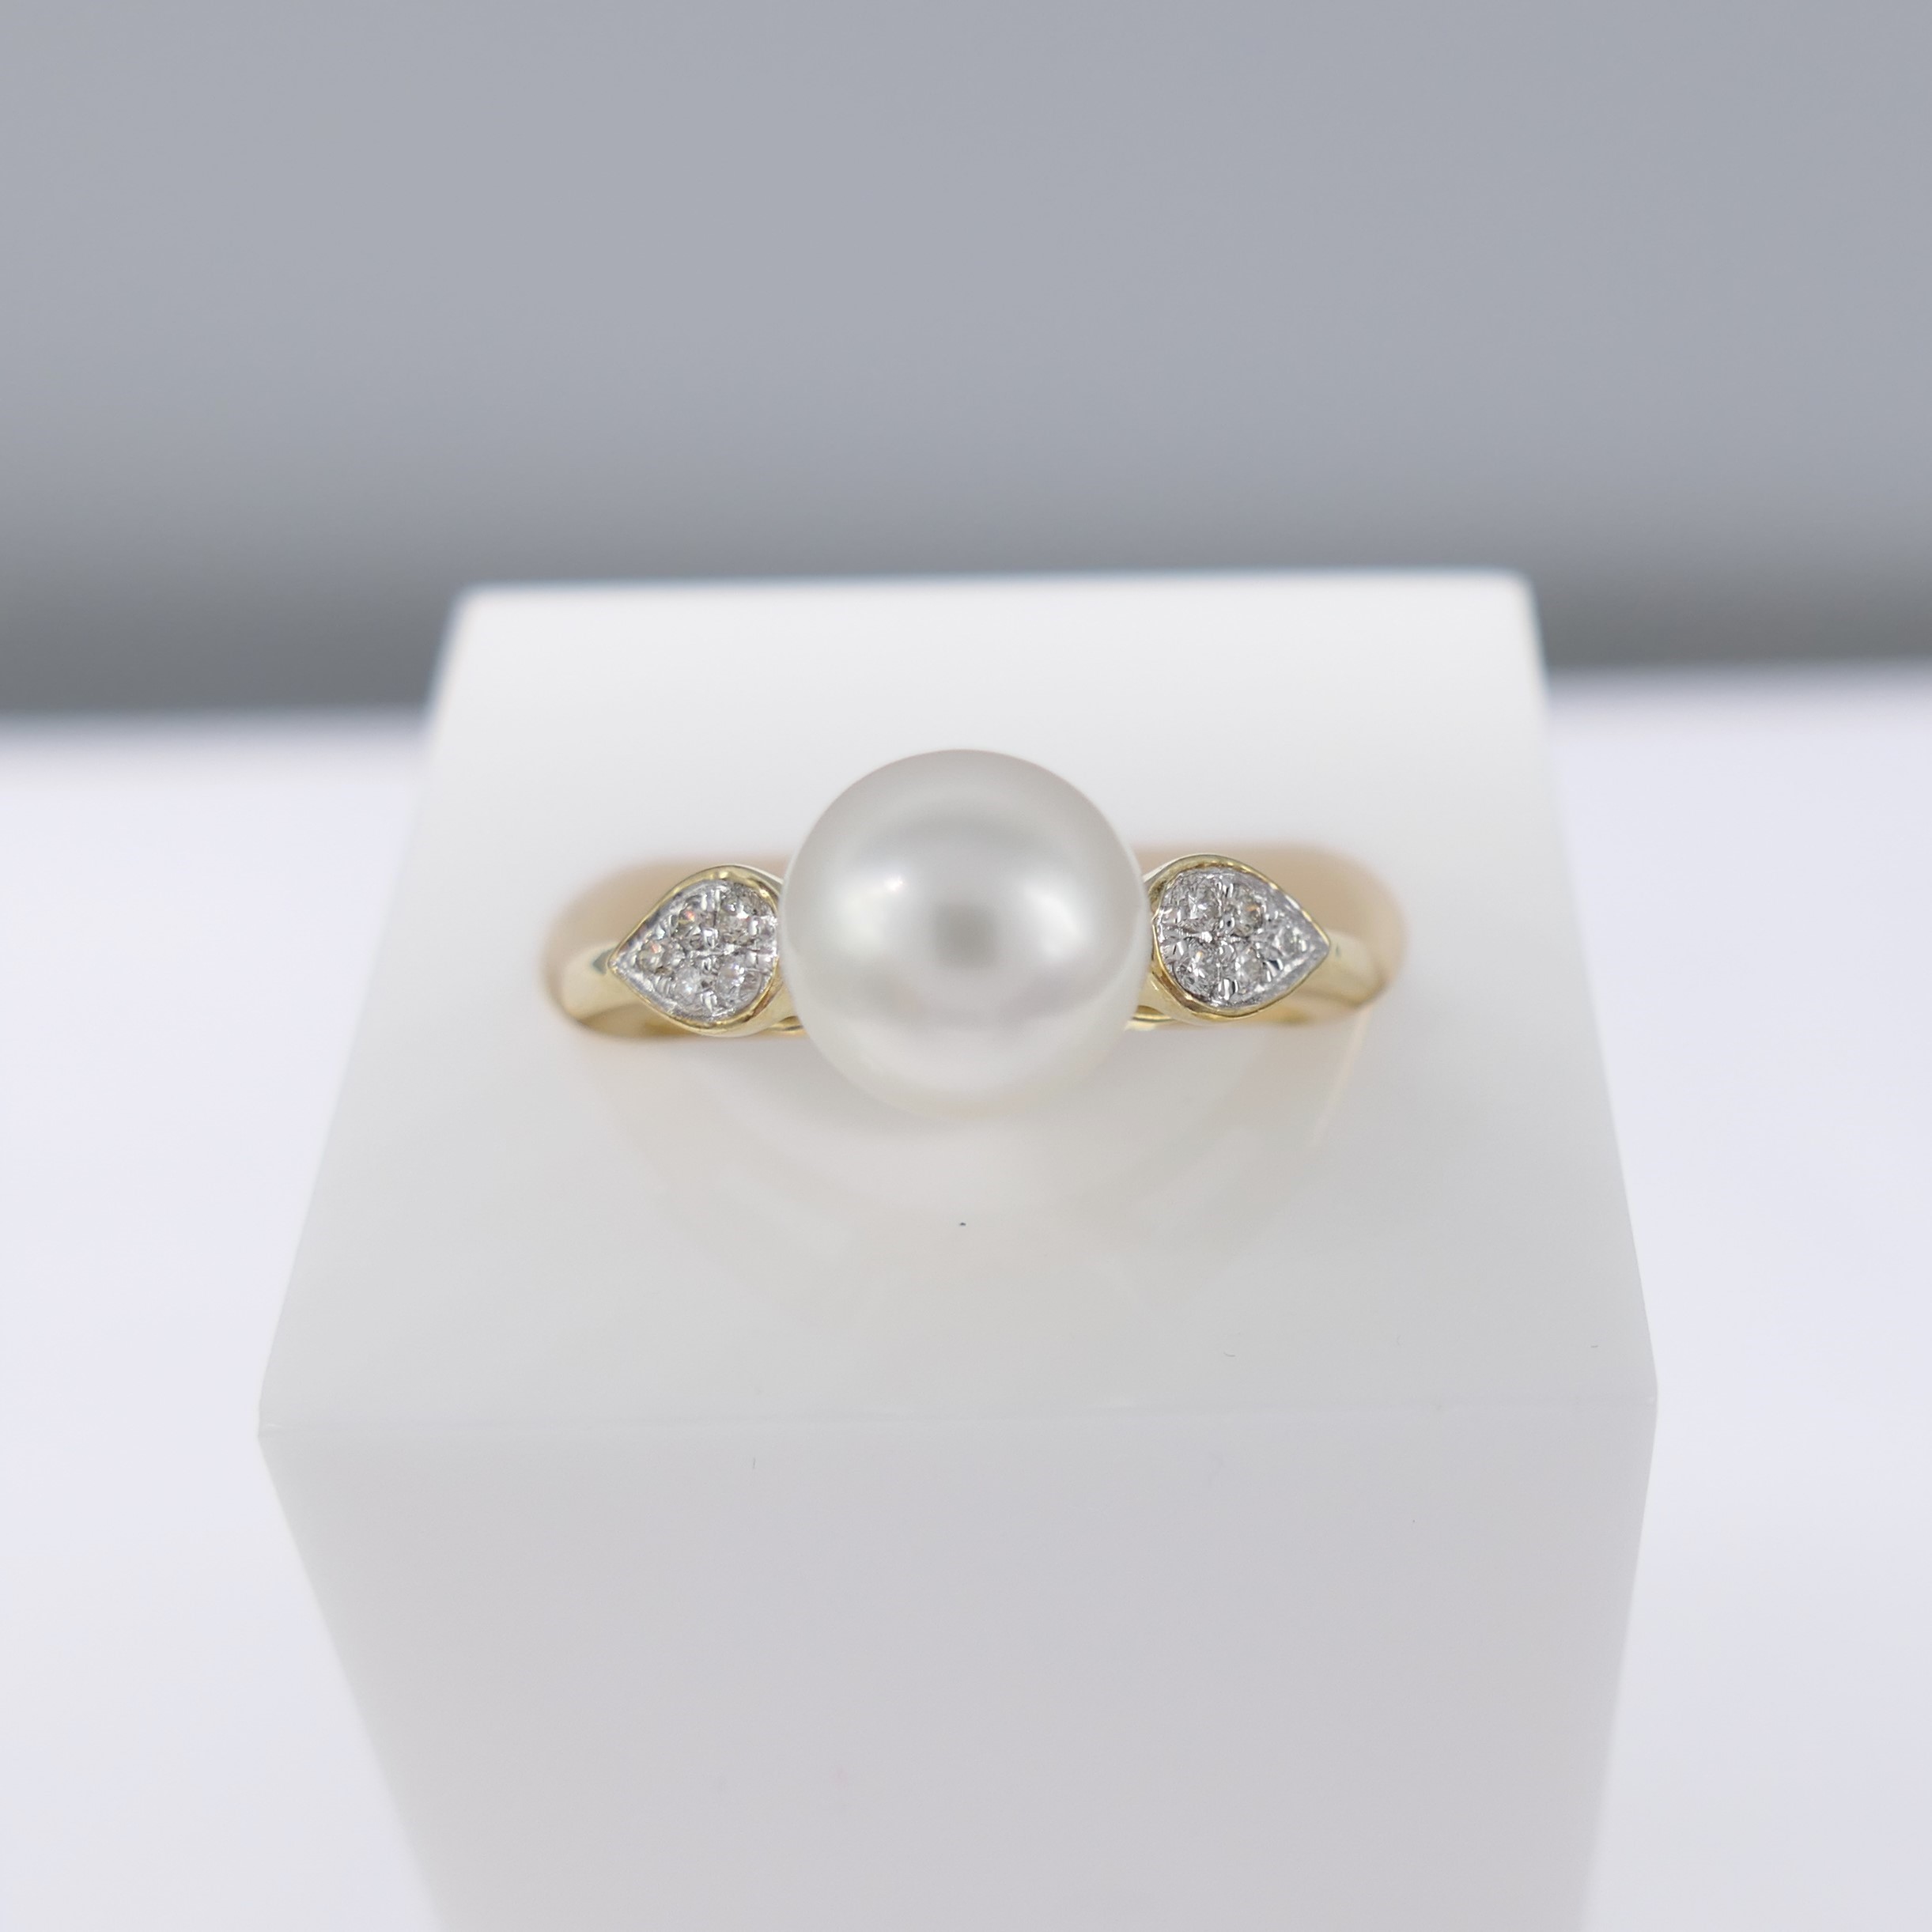 Cultured Pearl Dress Ring With Diamond-Set Shoulders, In Yellow Gold - Image 3 of 6